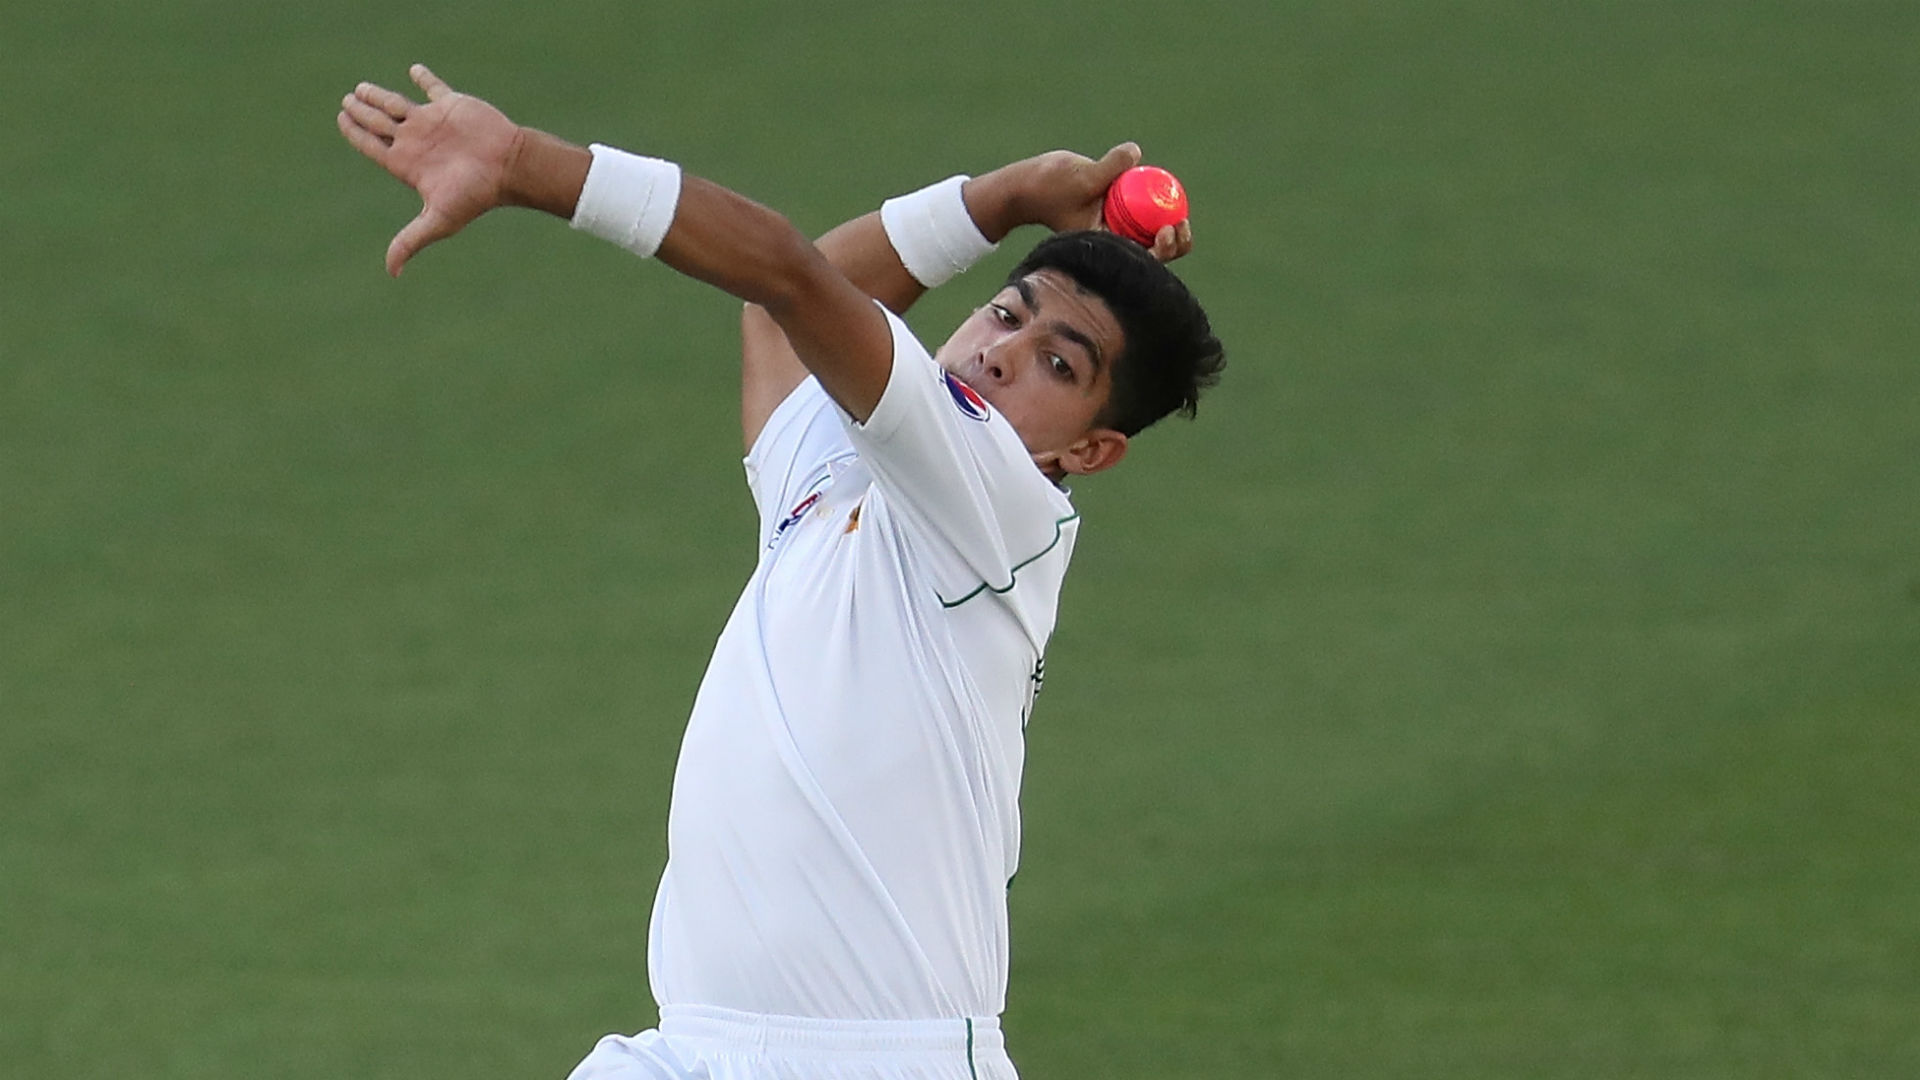 At 16 years of age, promising bowler Naseem Shah will be given a chance to show what he can do on the global stage for Pakistan.